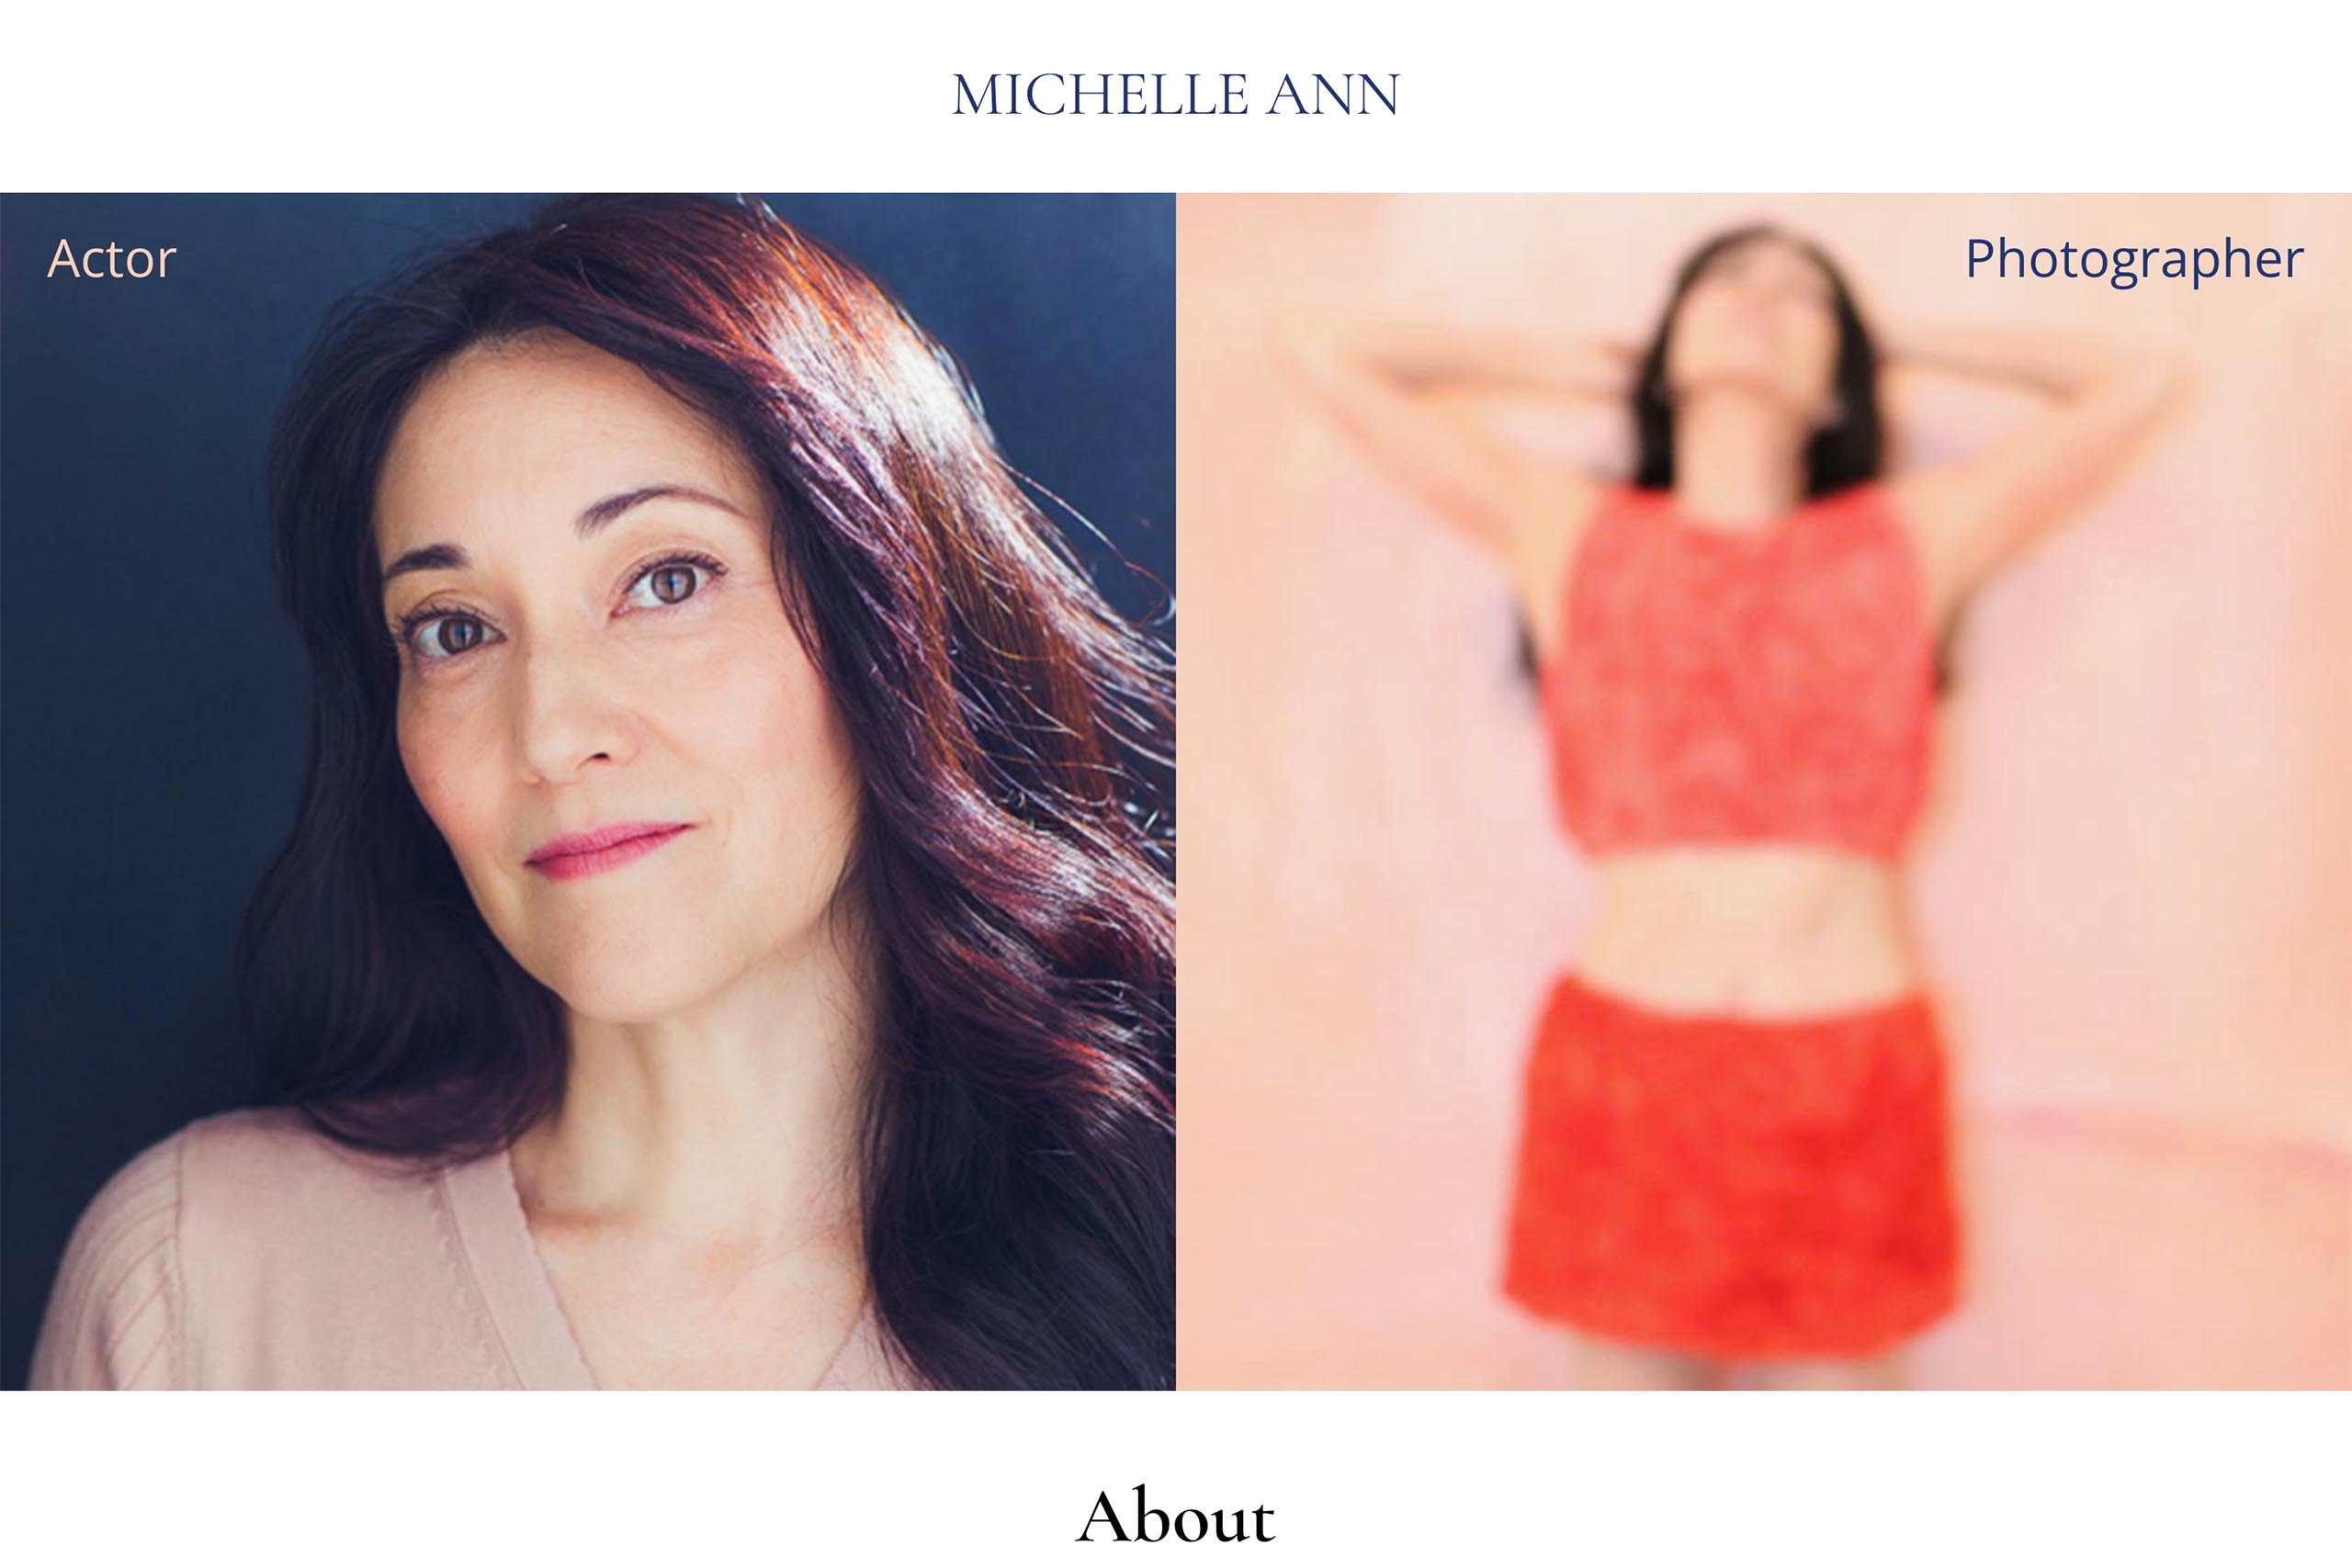 creative website design for an actor and photographer in New York - Michelle Ann